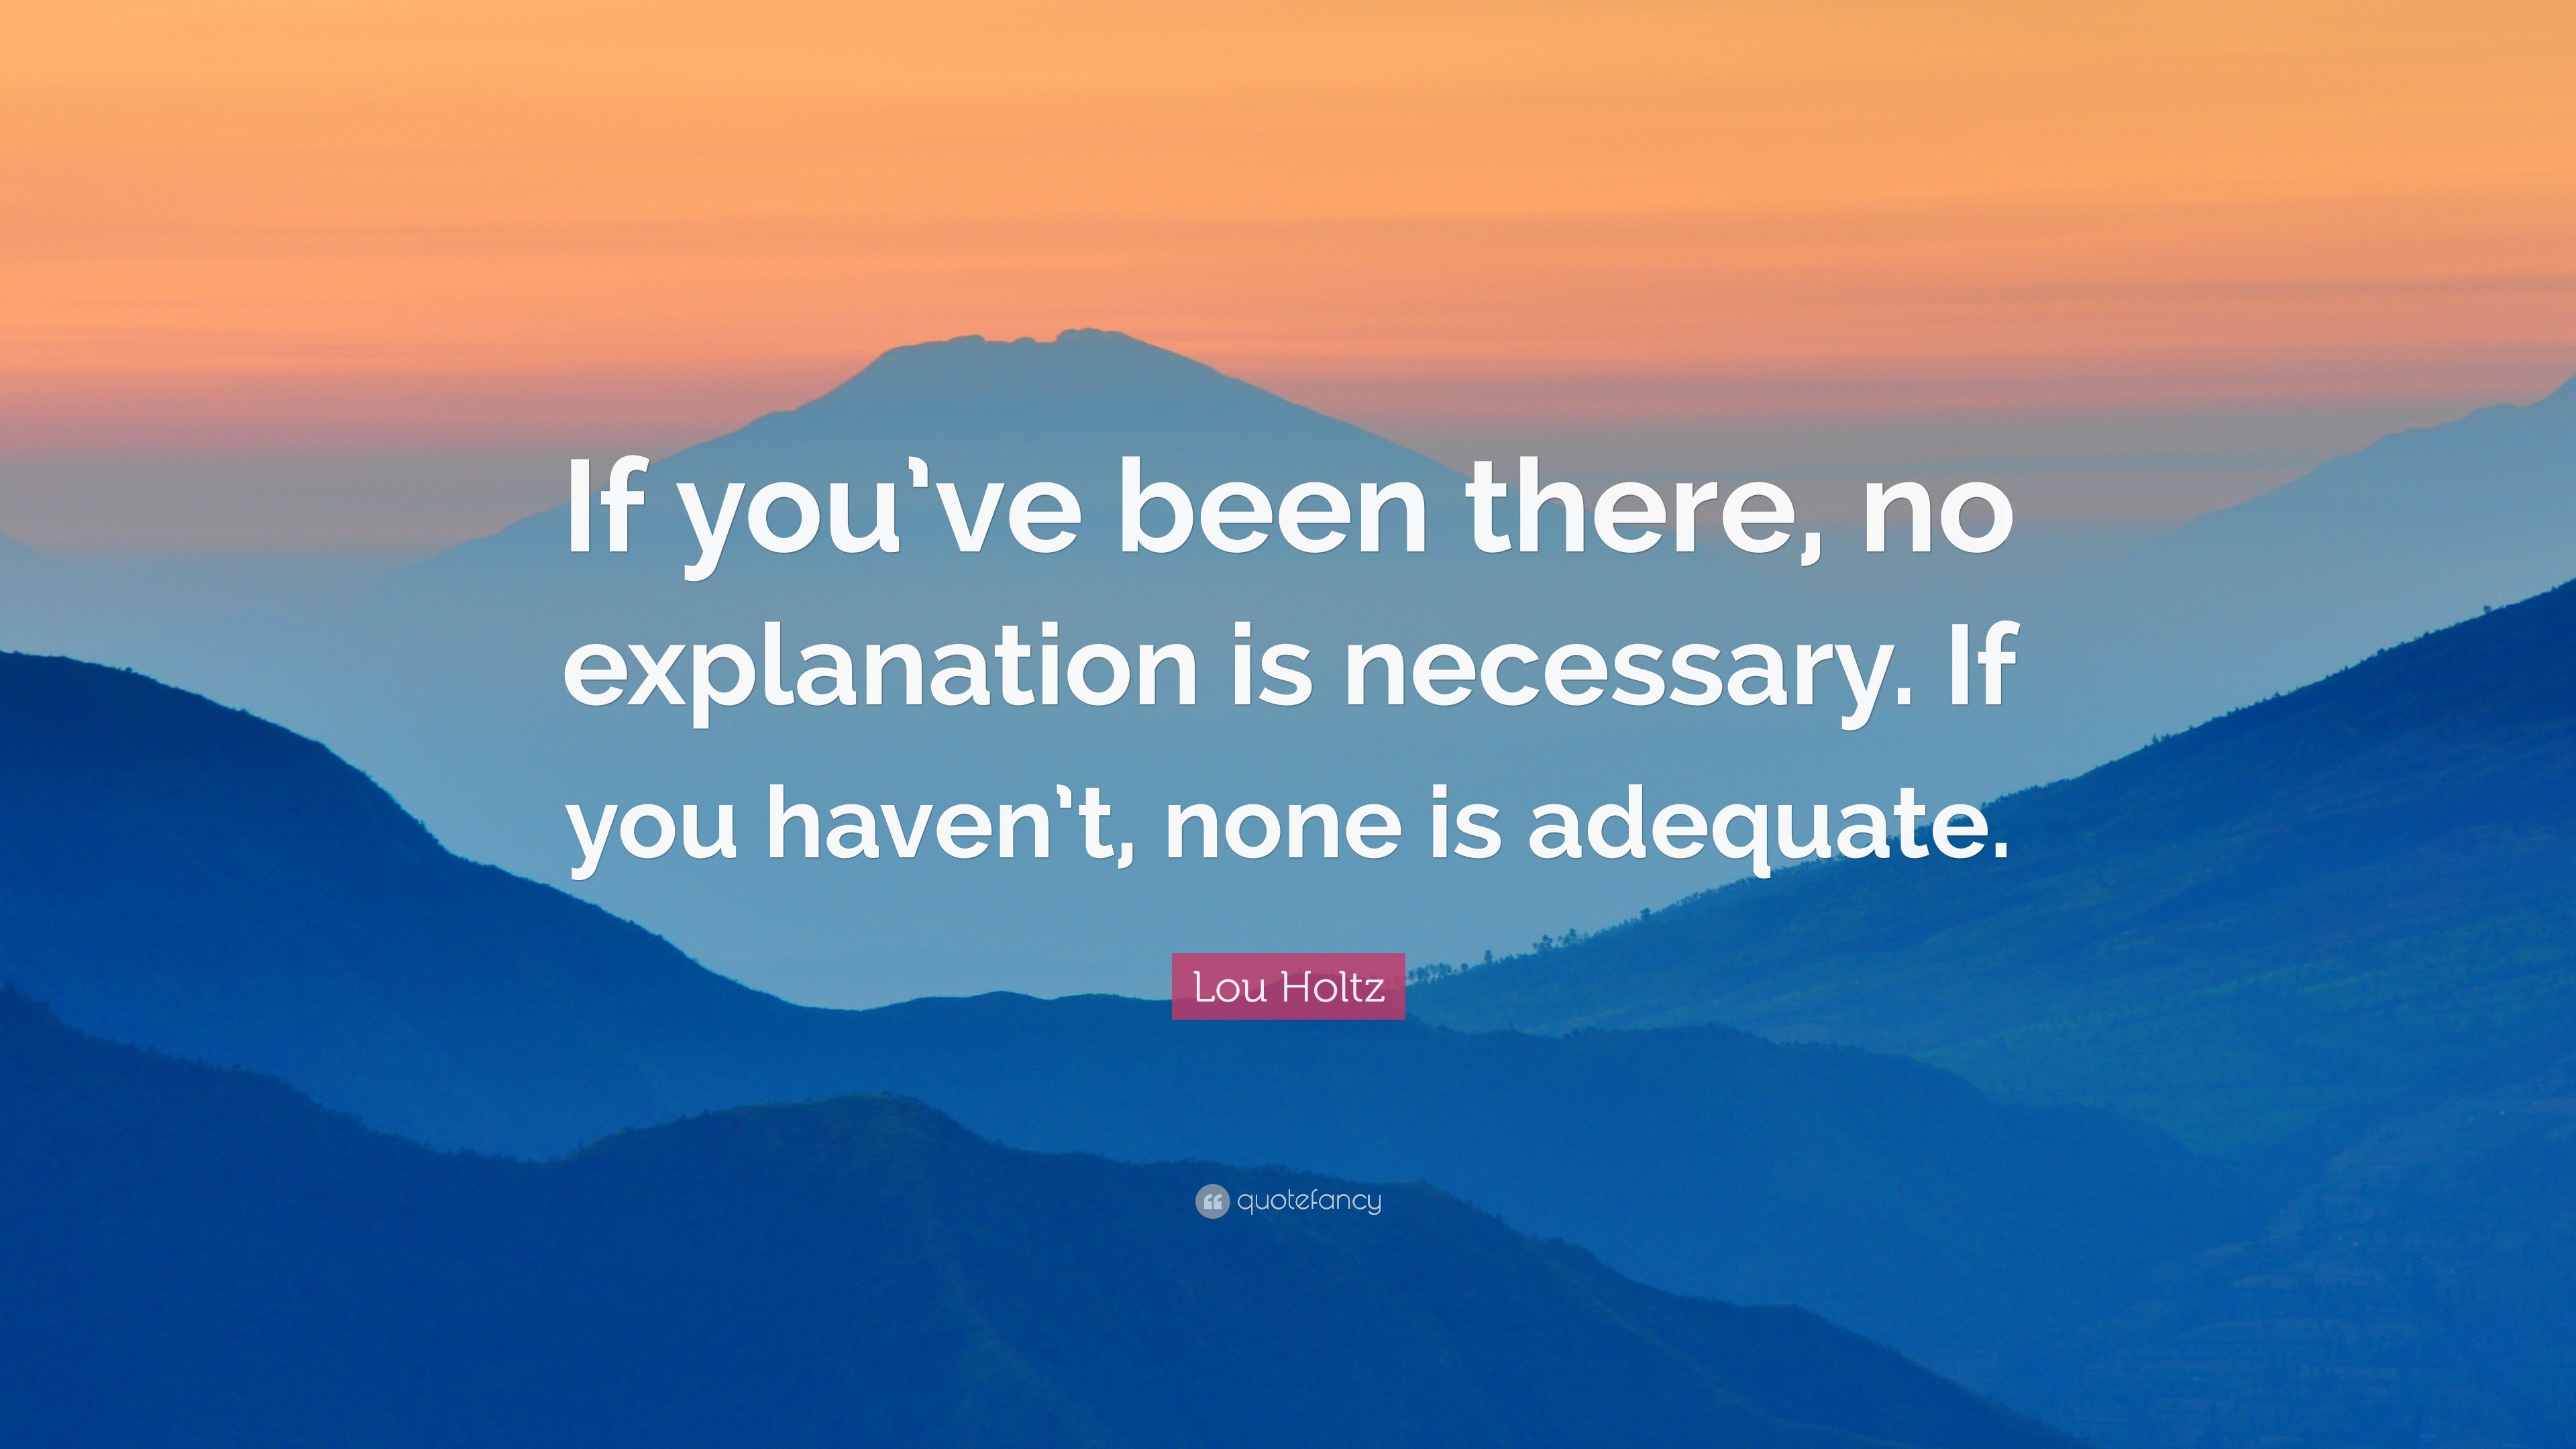 lou-holtz-quote-if-you-ve-been-there-no-explanation-is-necessary-if